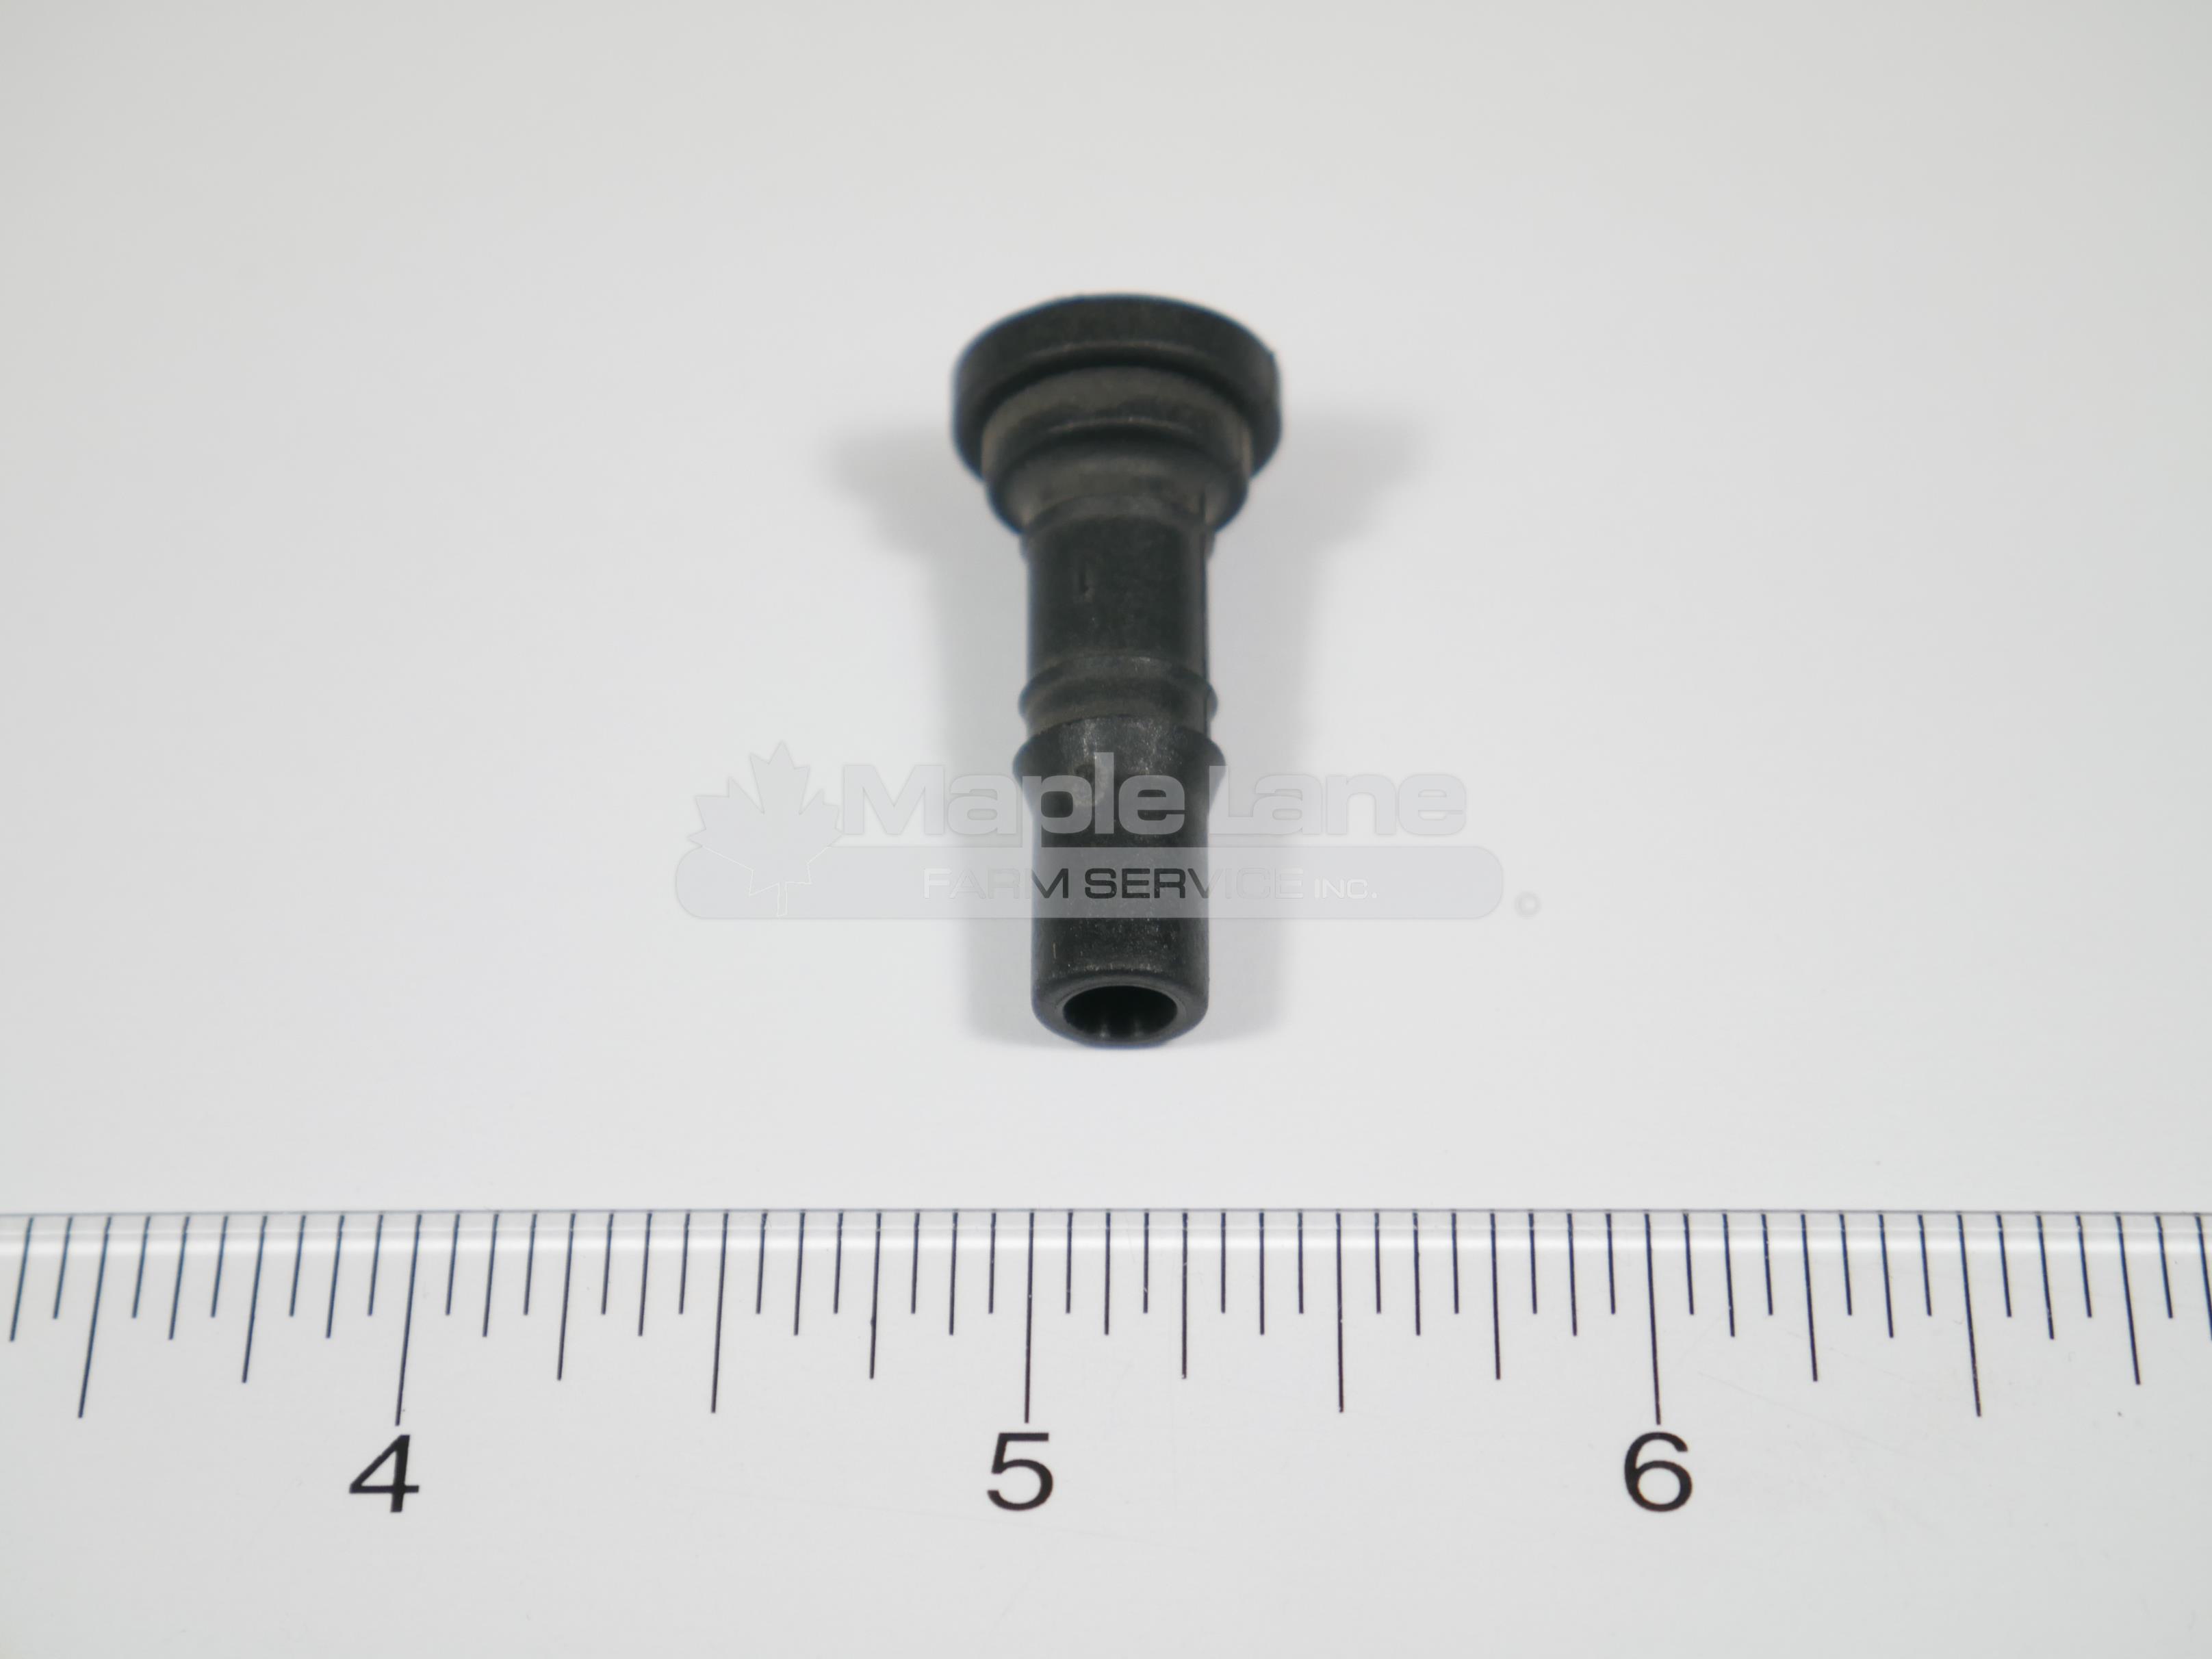 331807 Fitting 5/16" HB 3/8" Nut